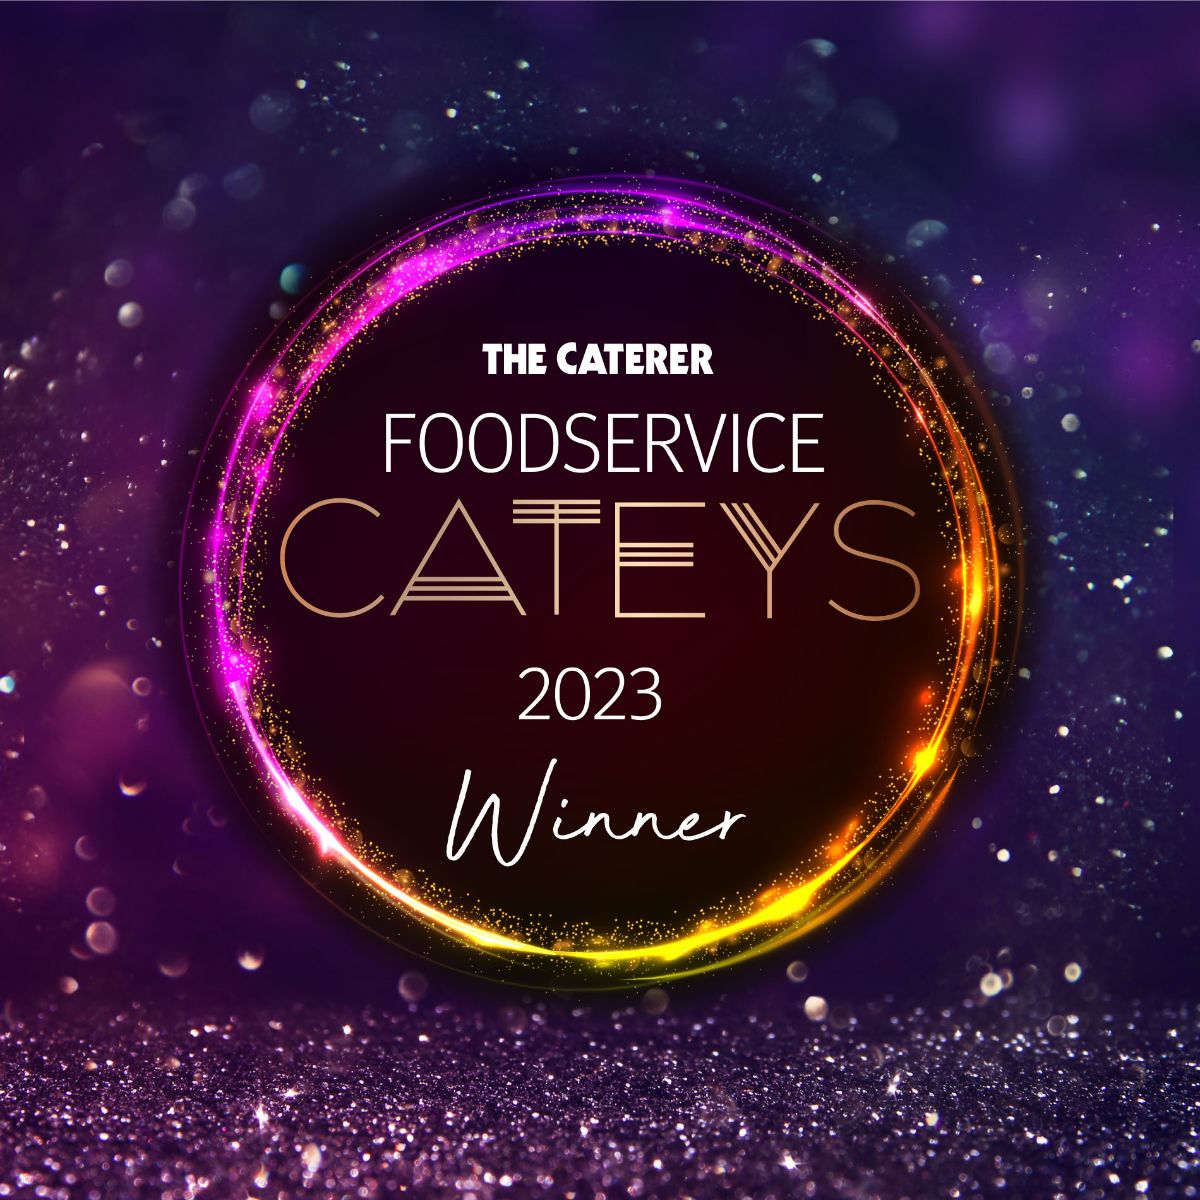 Named Event Caterer of the Year and Boutique Caterer of the Year at the 2023 Foodservice Cateys.